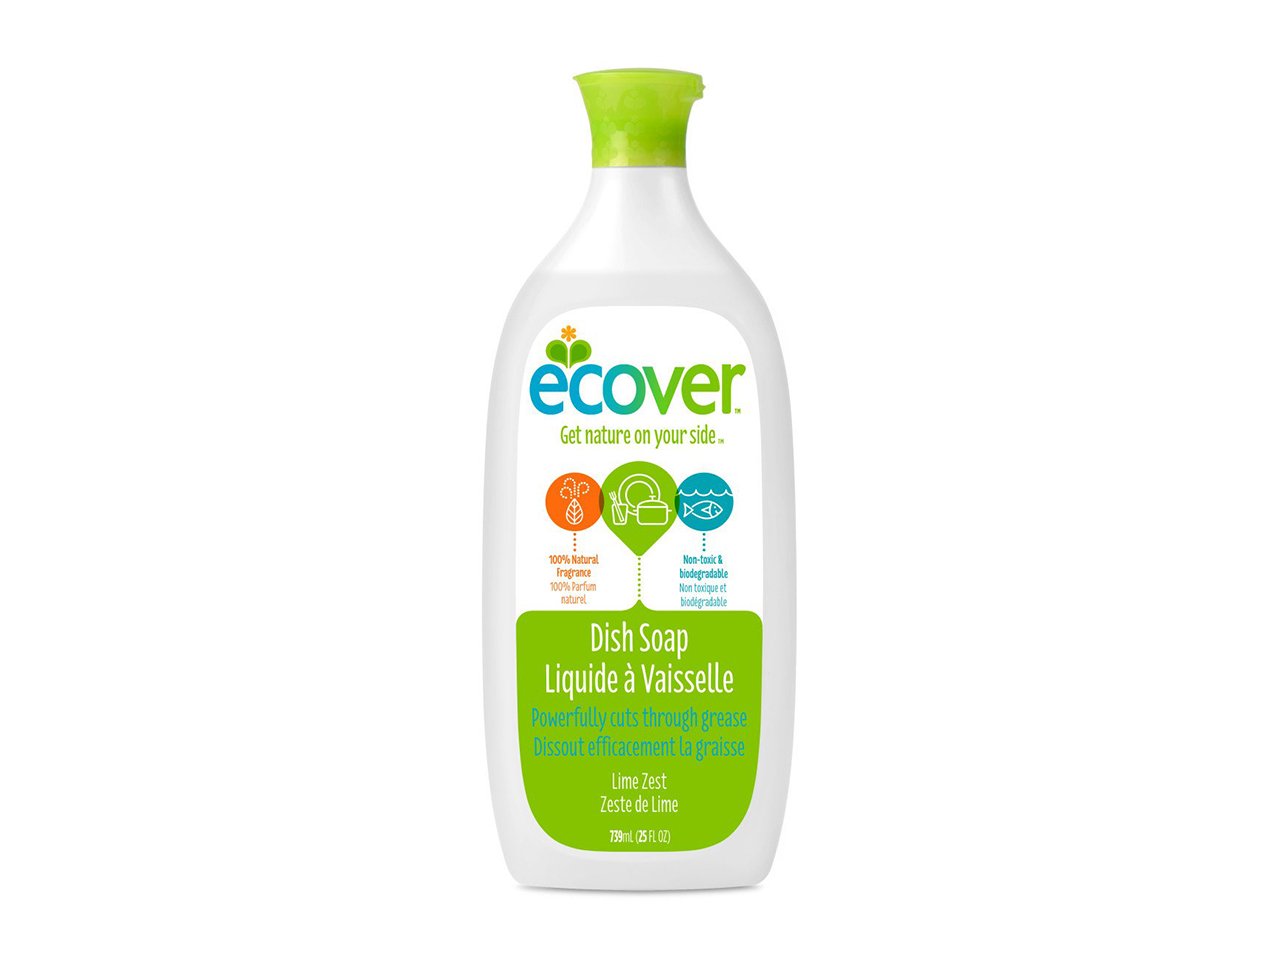 Eco-friendly cleaners, white ecover dish soap bottle with green cap and label